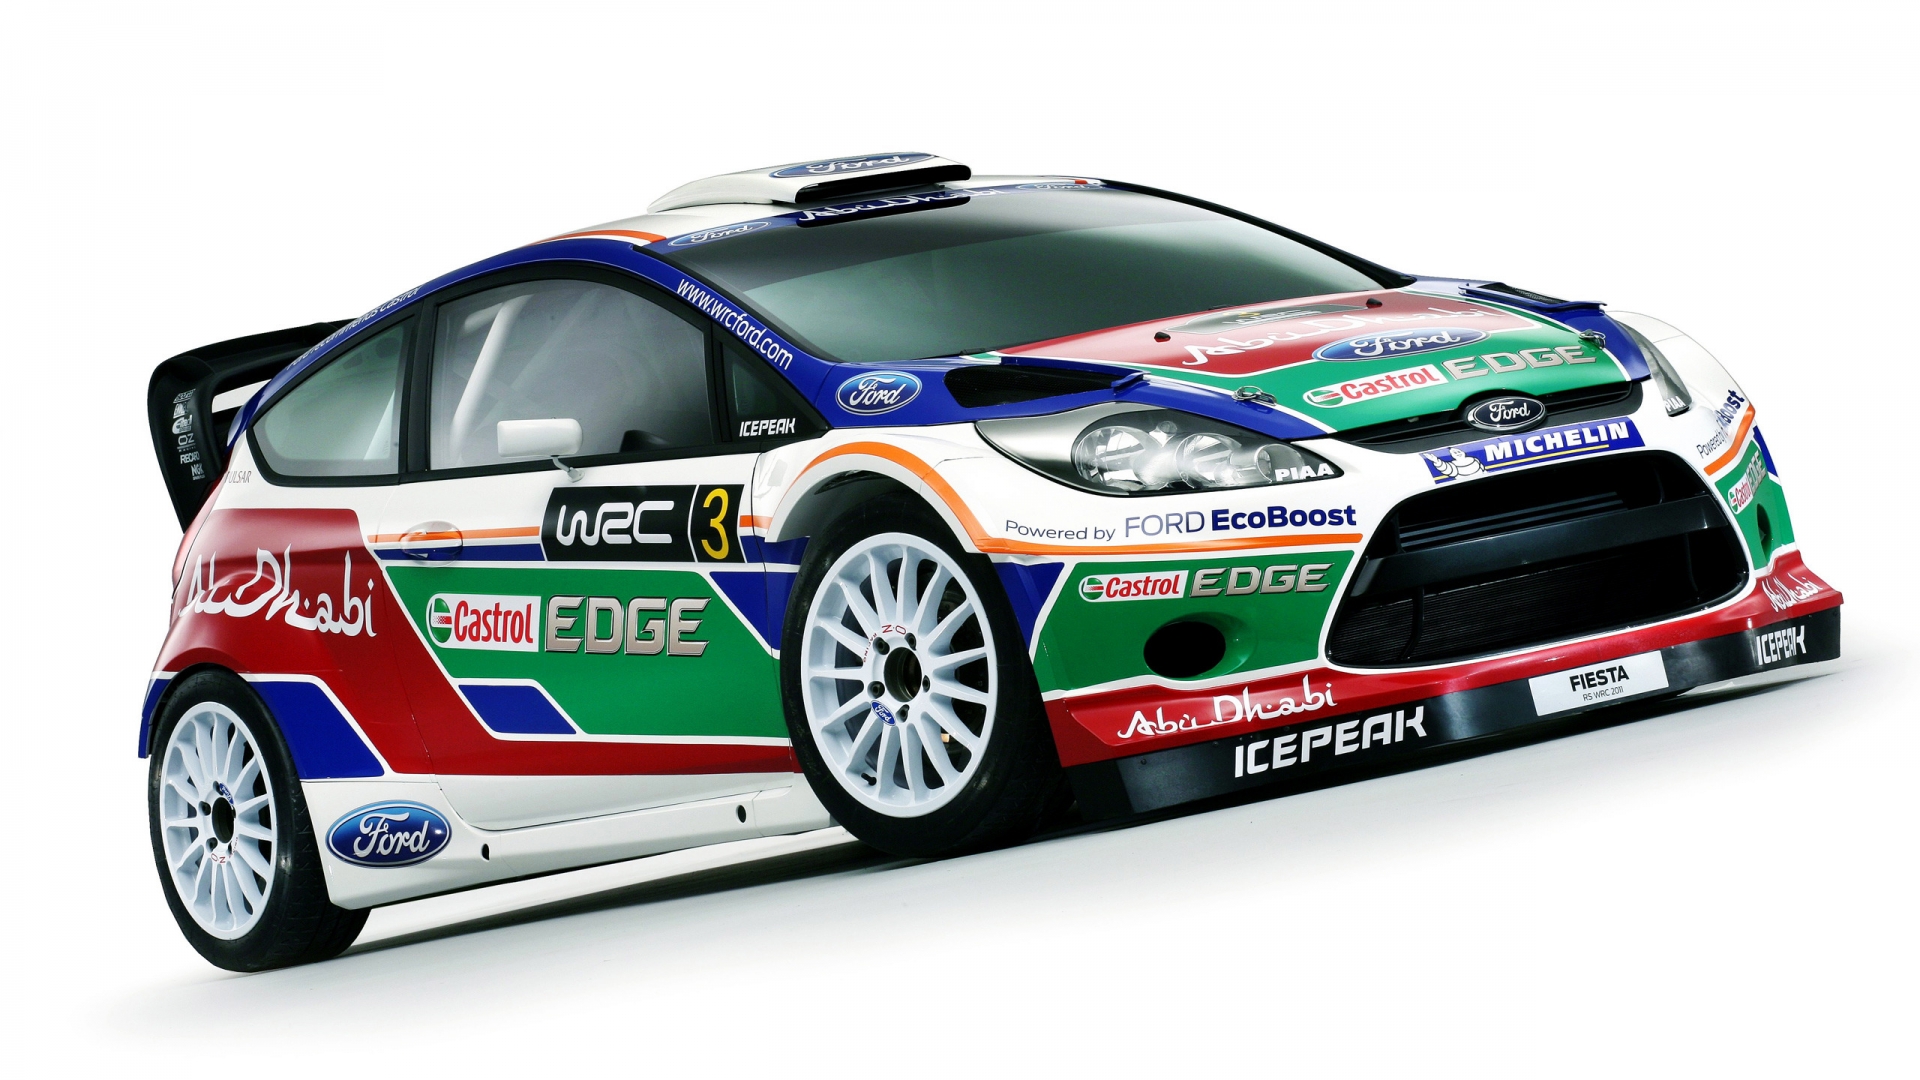 Ford Fiesta WRC for 1920 x 1080 HDTV 1080p resolution